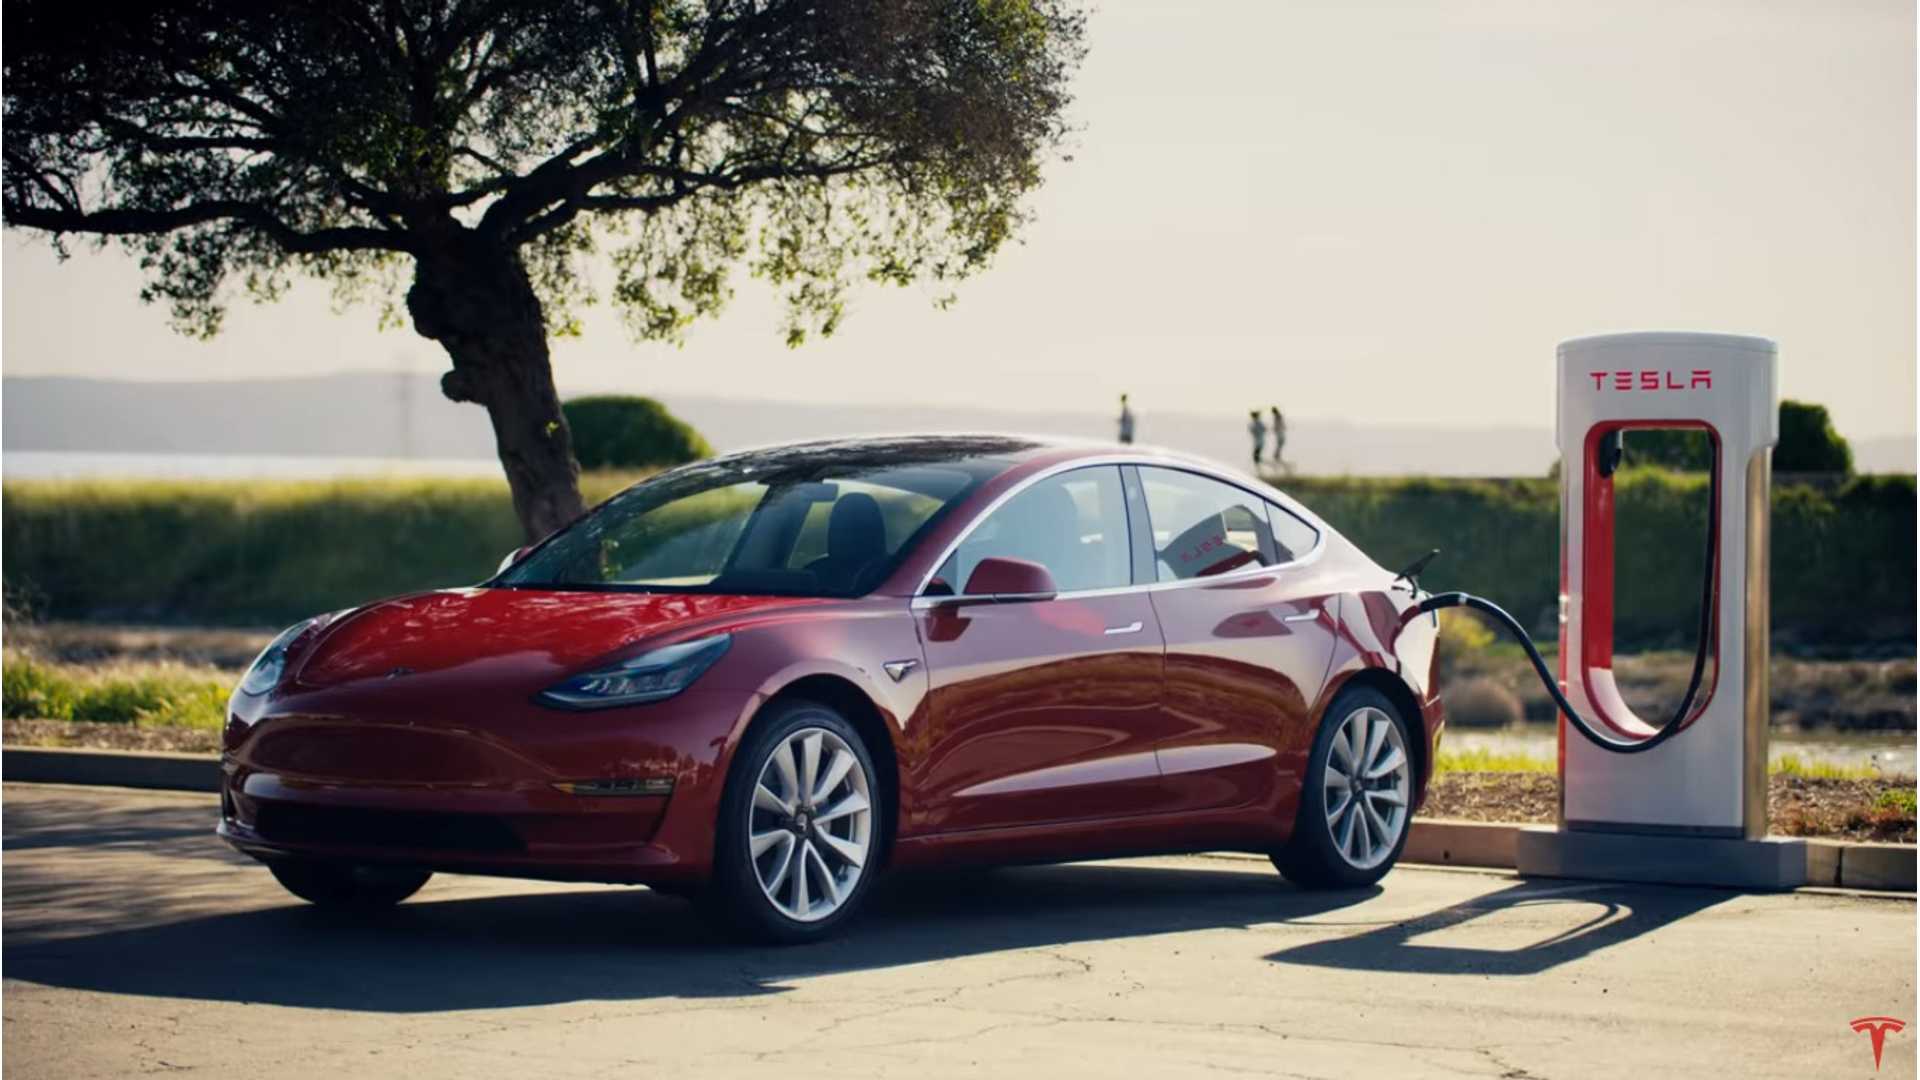 tesla-model-3-on-supercharger-v3-here-are-the-charging-specs